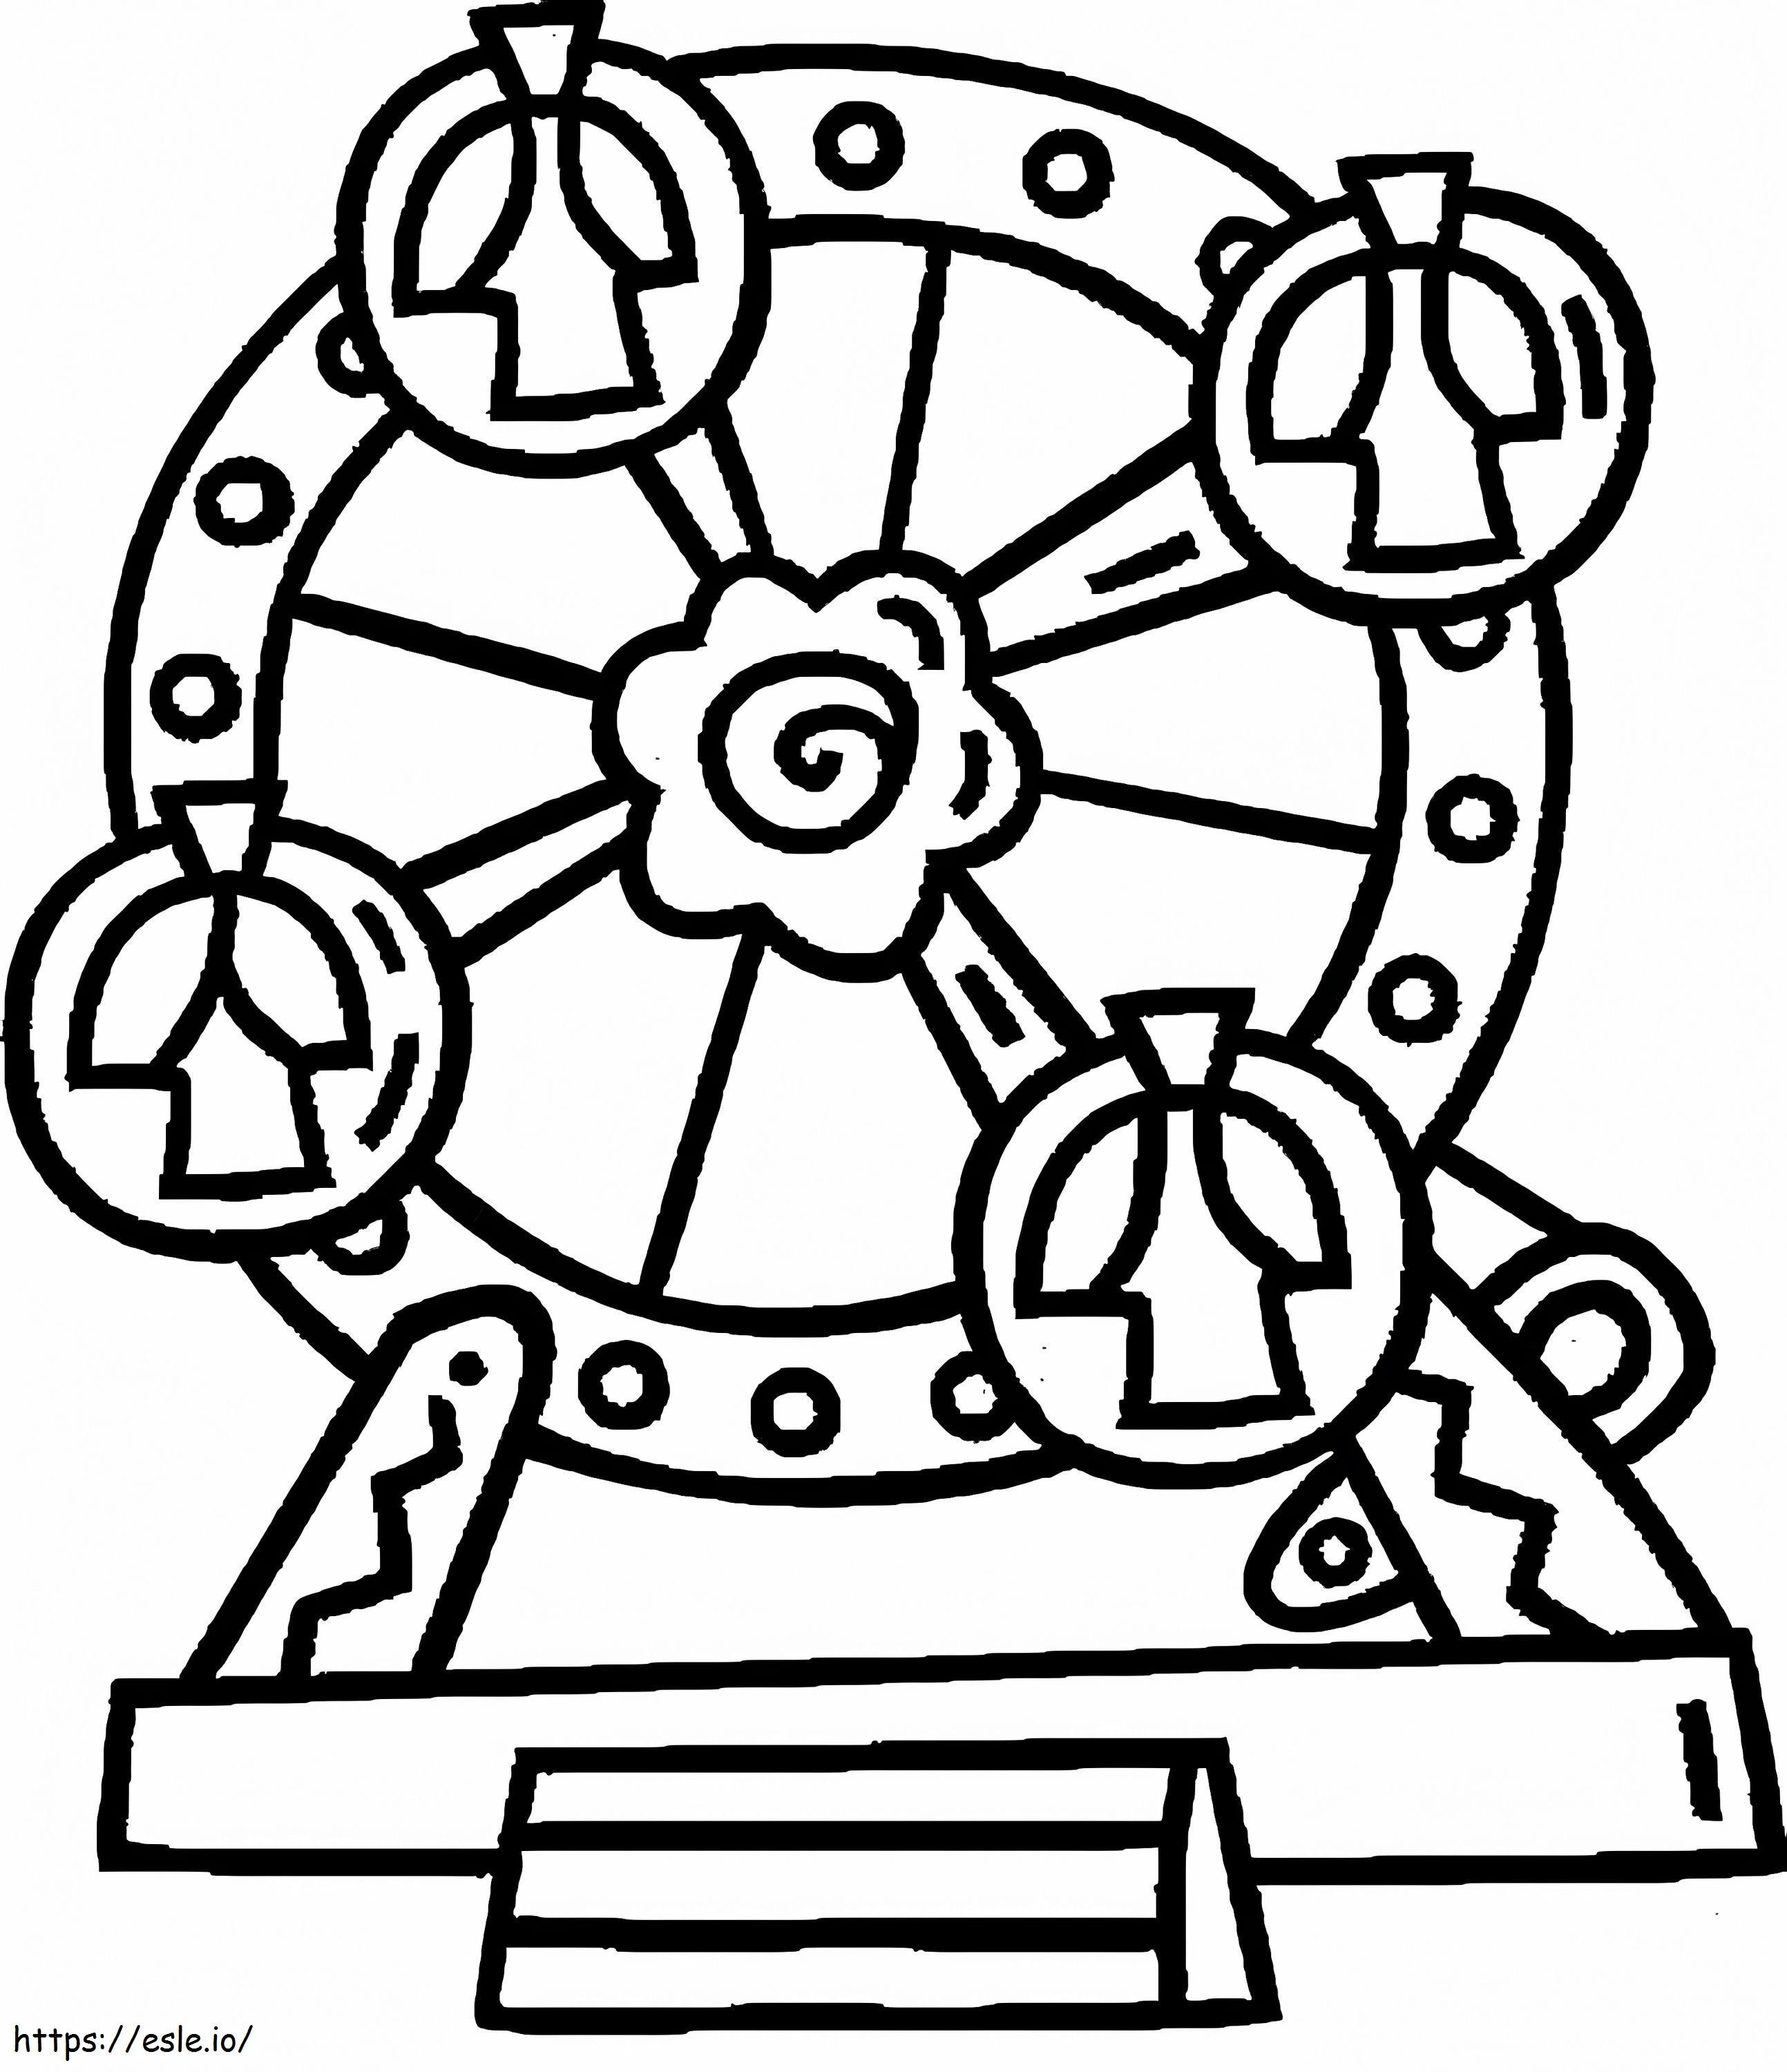 Adorable Ferris Wheel coloring page